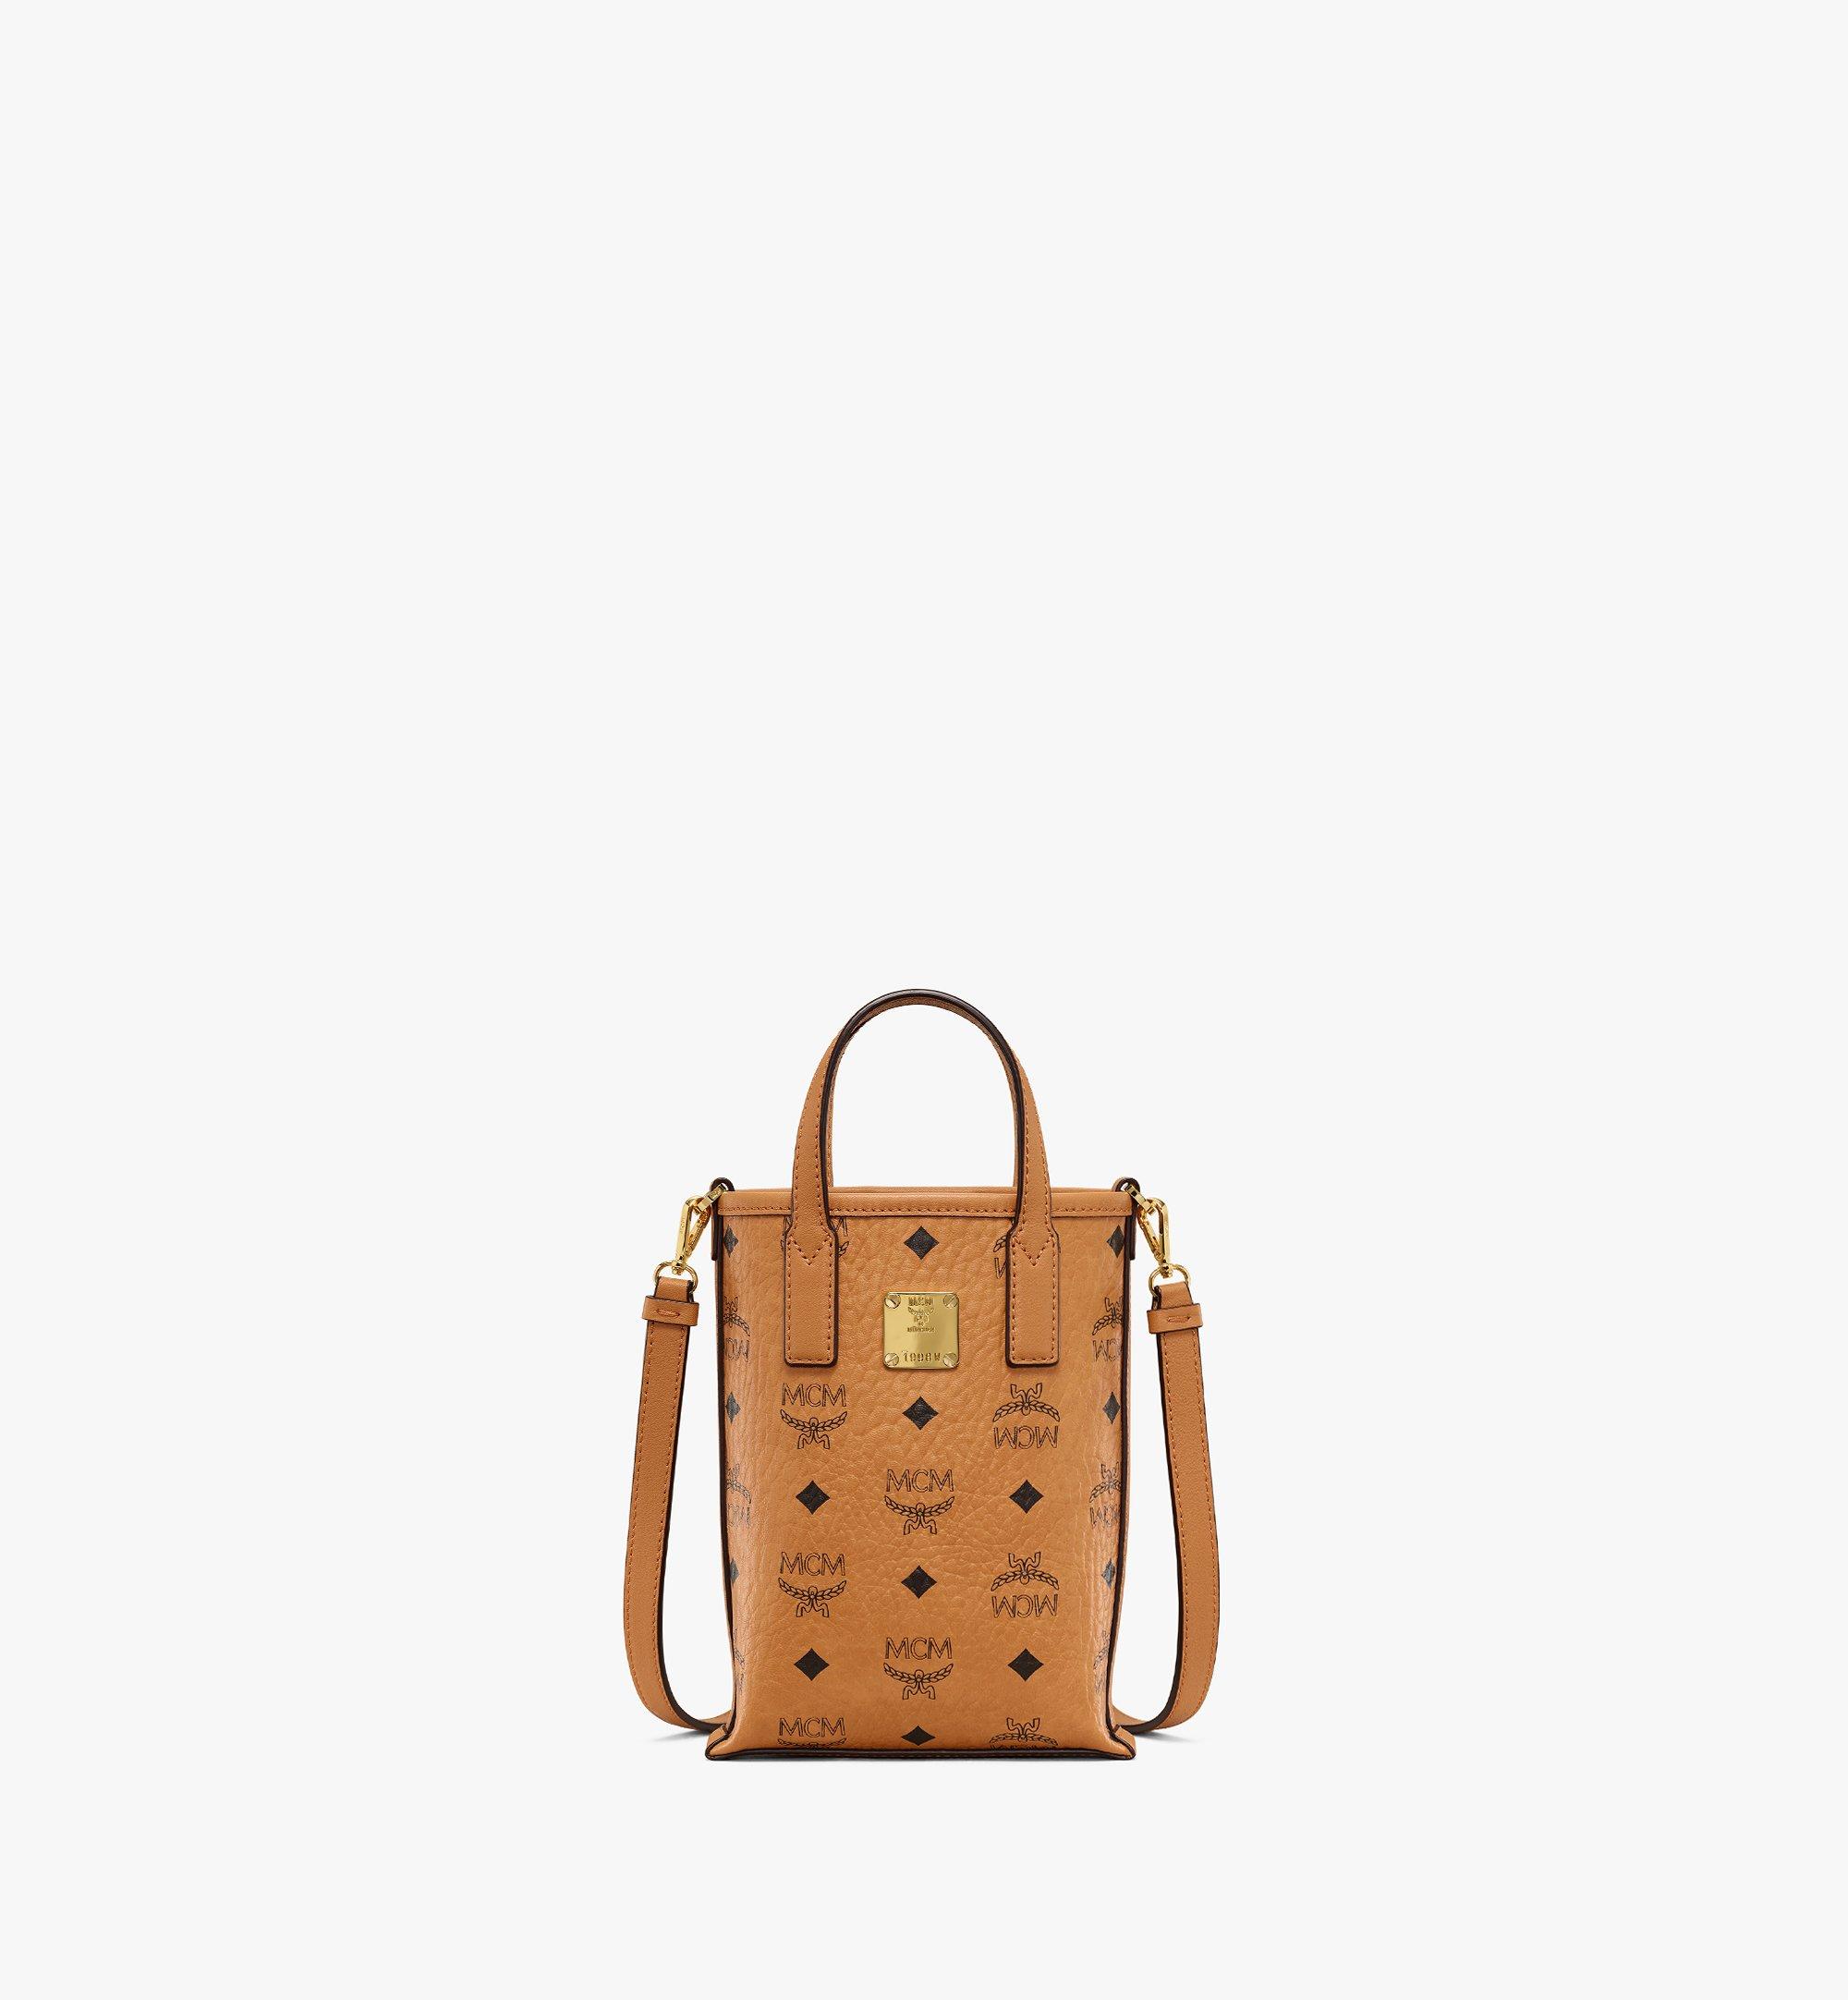 Mcm Outlet: mini bag for woman - Brown  Mcm mini bag MMTCSKC02 online at